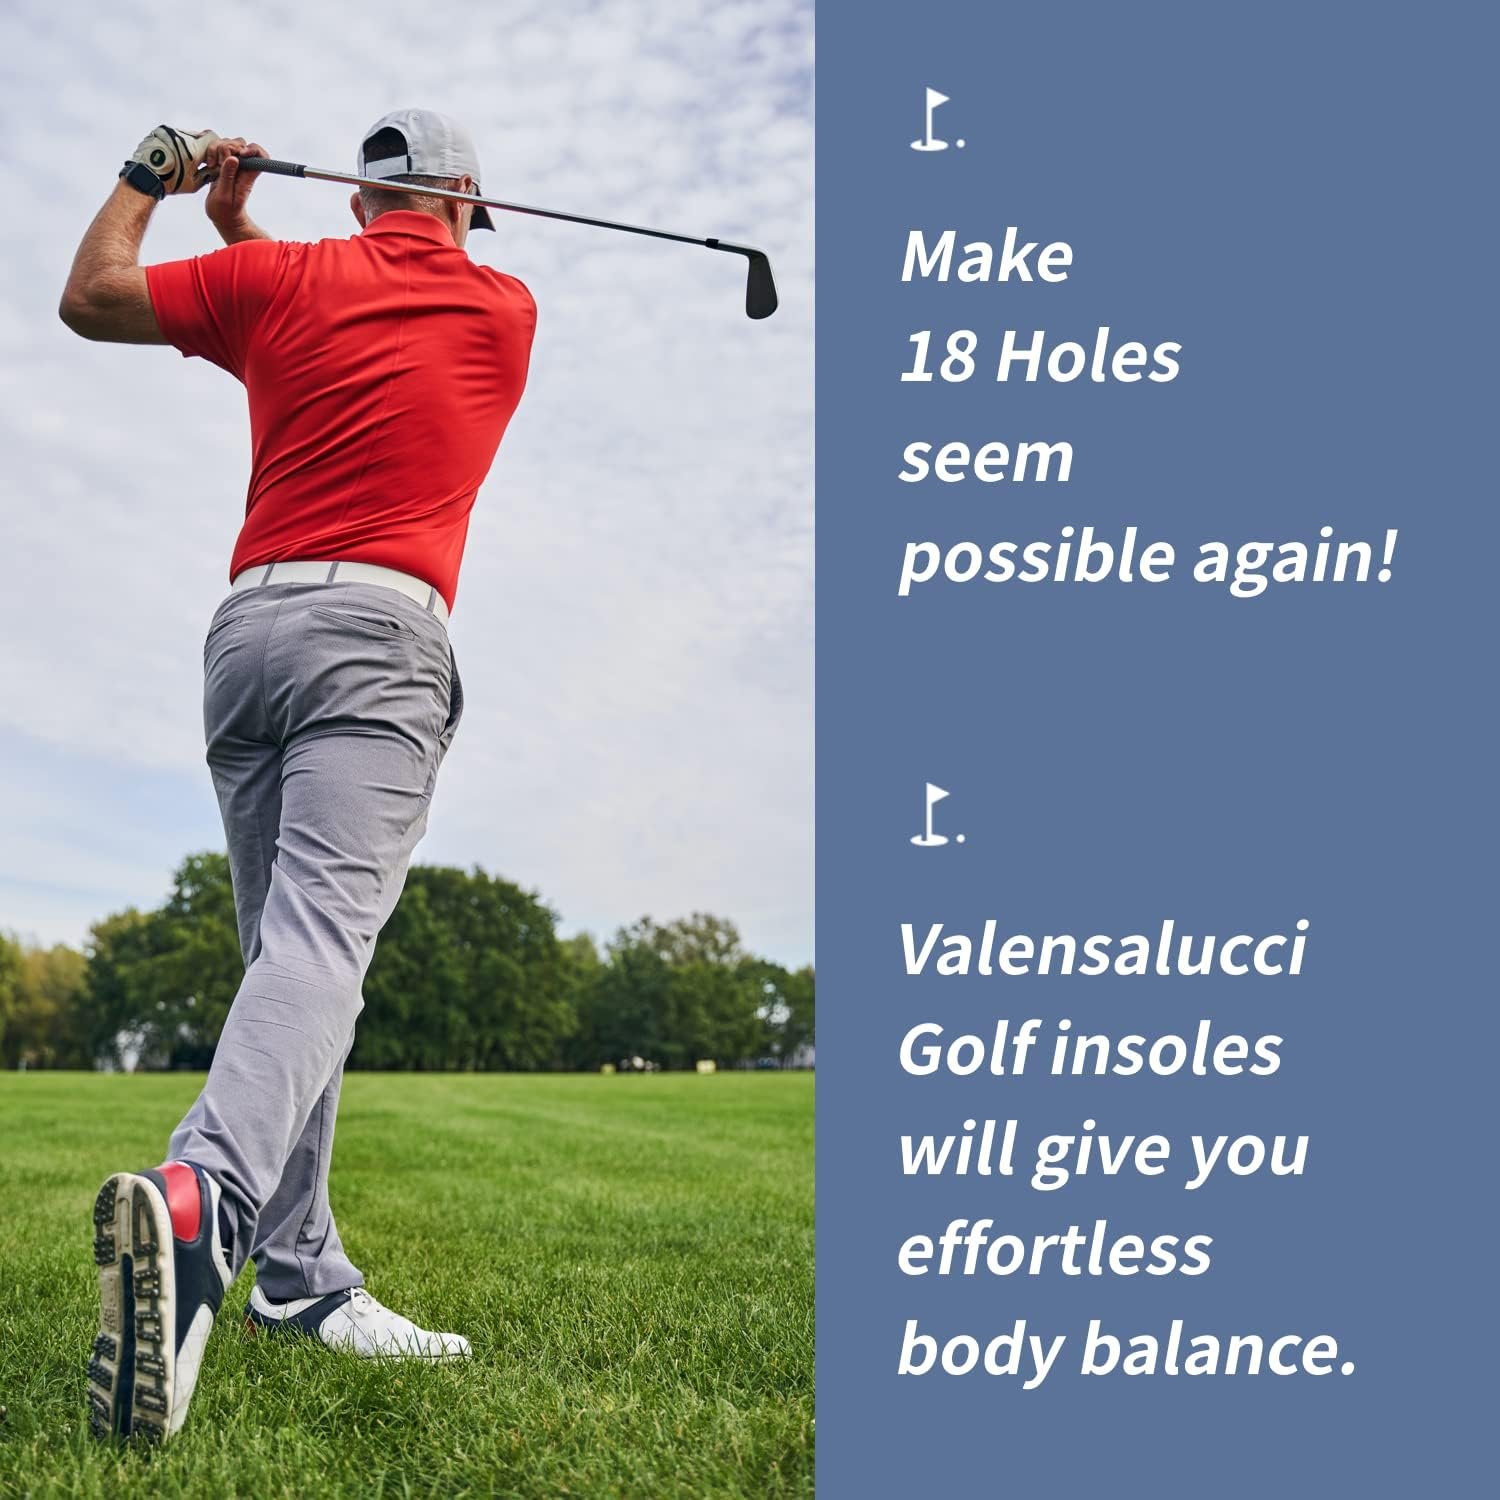 VALENSALUCCI Pro Golf Insole- Secret Angle for Distance Increase, Orthotic Insoles, Flat Feet Foot - Arch Support, Professional Golf Shoes (L (Men 8.5-11.5/ Women 9.5-12.5))